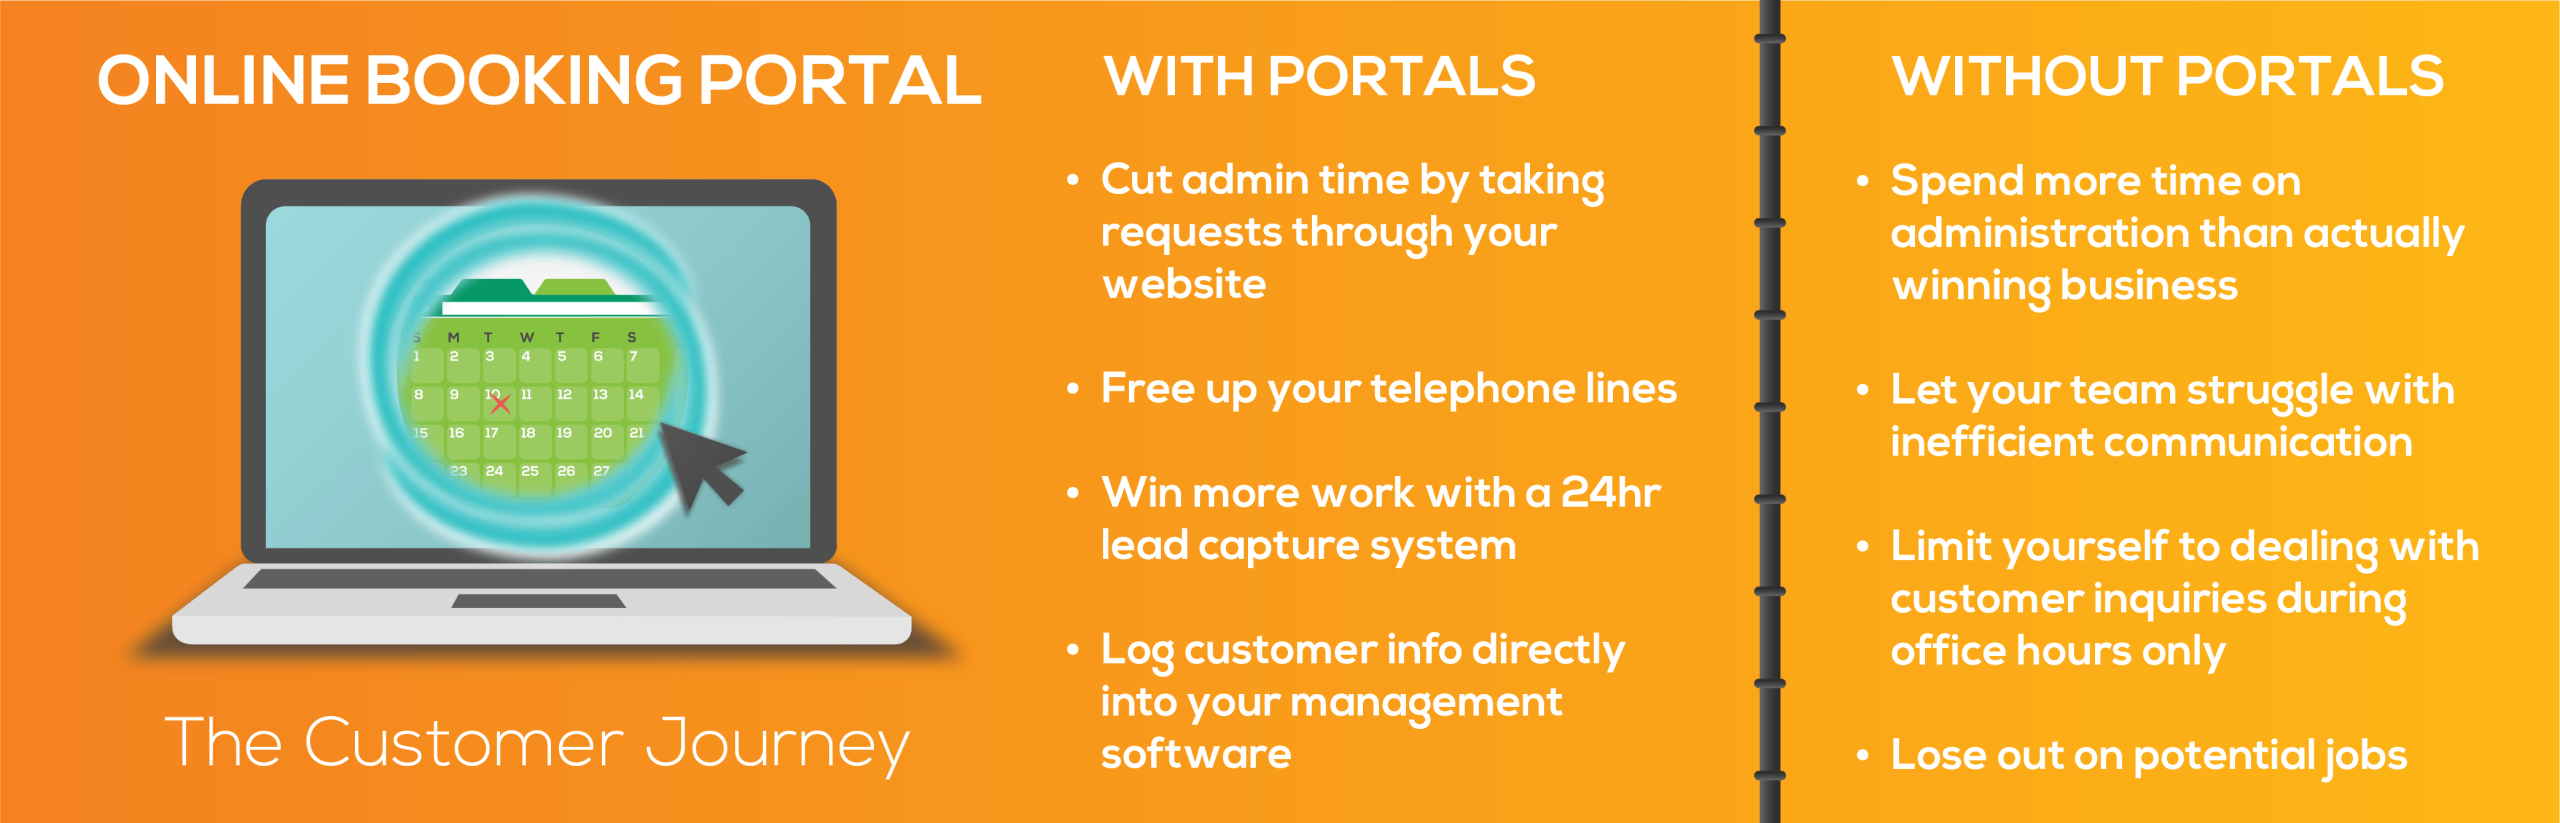 Booking portal infographic